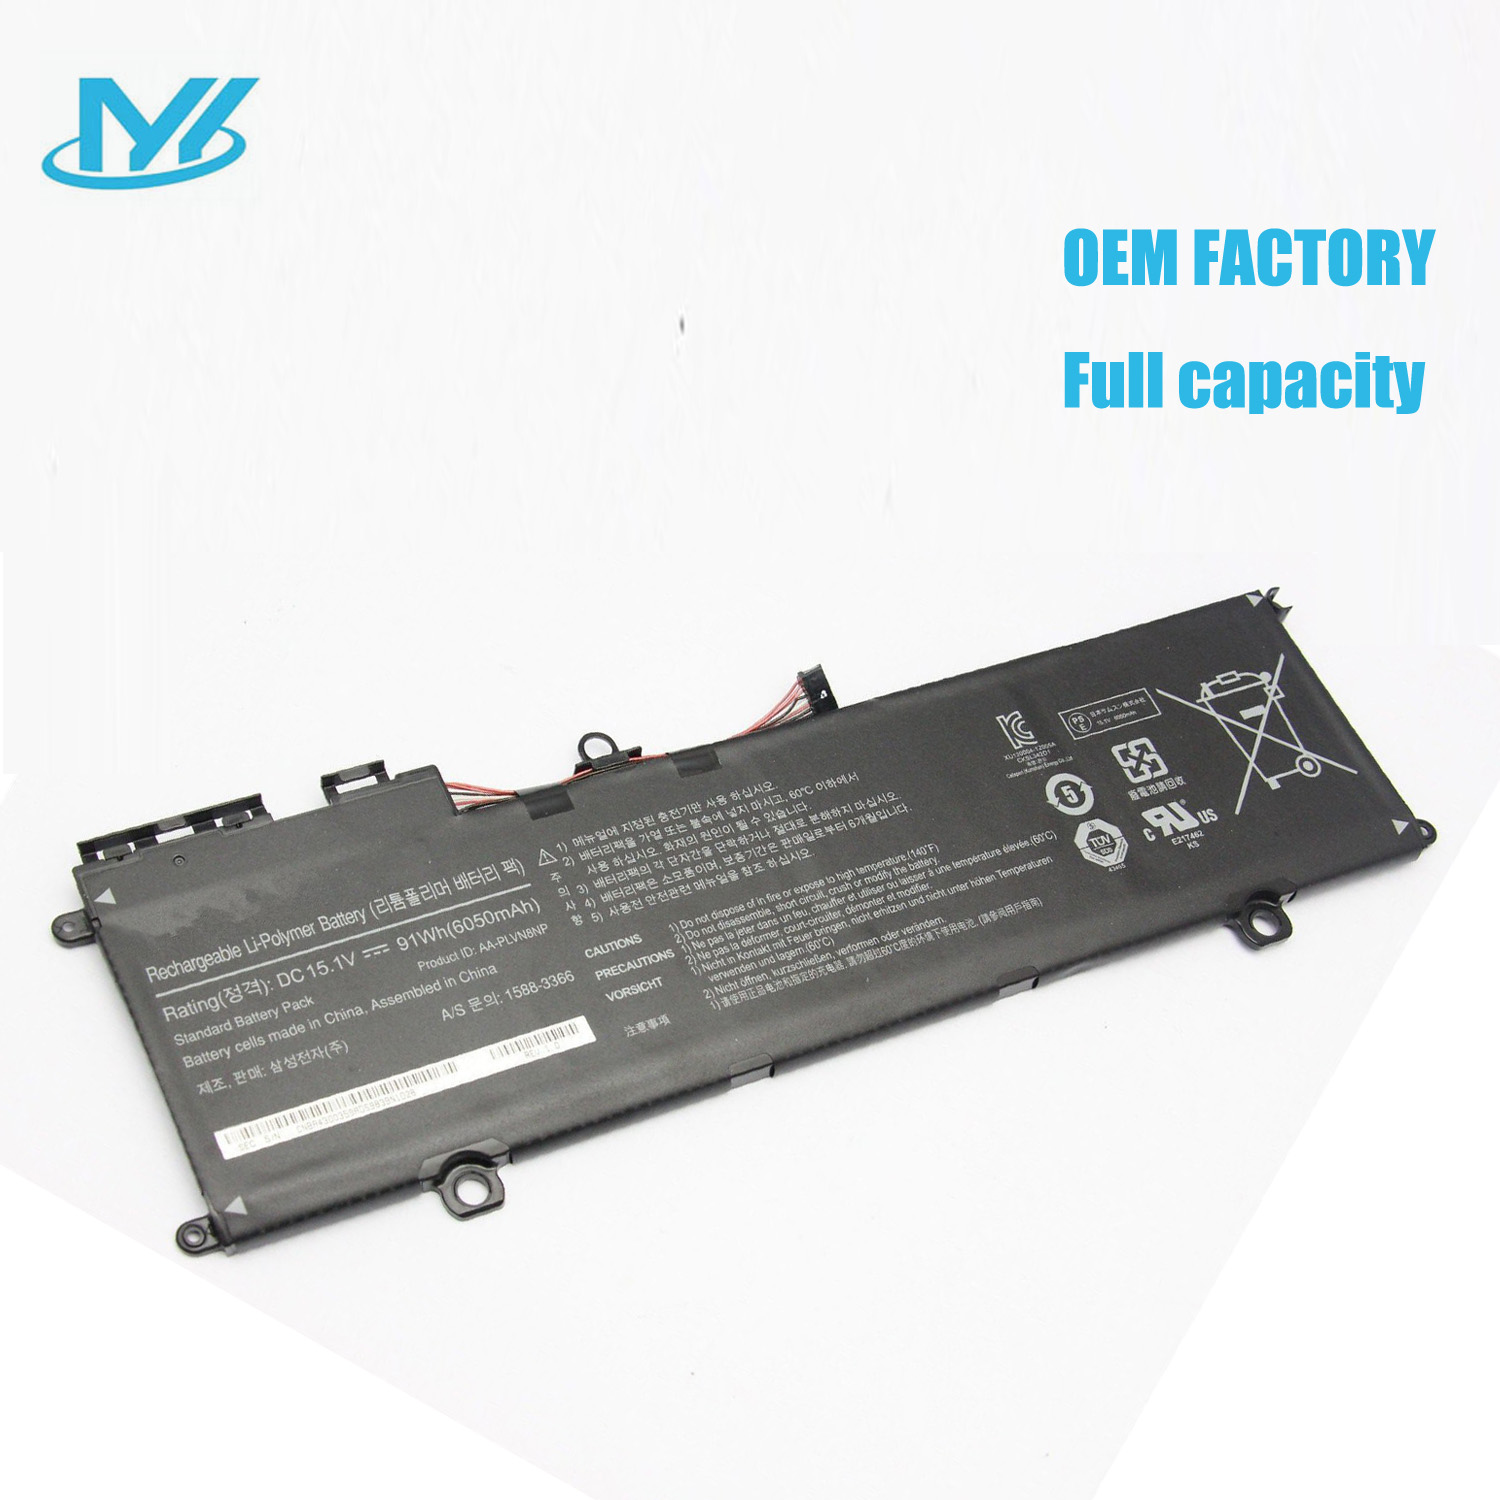 AA-PLVN8NP rechargeable lithium ion Notebook battery Laptop battery Portege870Z5G NP870Z5G 870Z5G-X01 NP870Z5G-X01CN 870Z5G-X02 NP870Z5G-X02CN 870Z5G-X03 NP870Z5G-X03CN 88025E15.1V 91WH